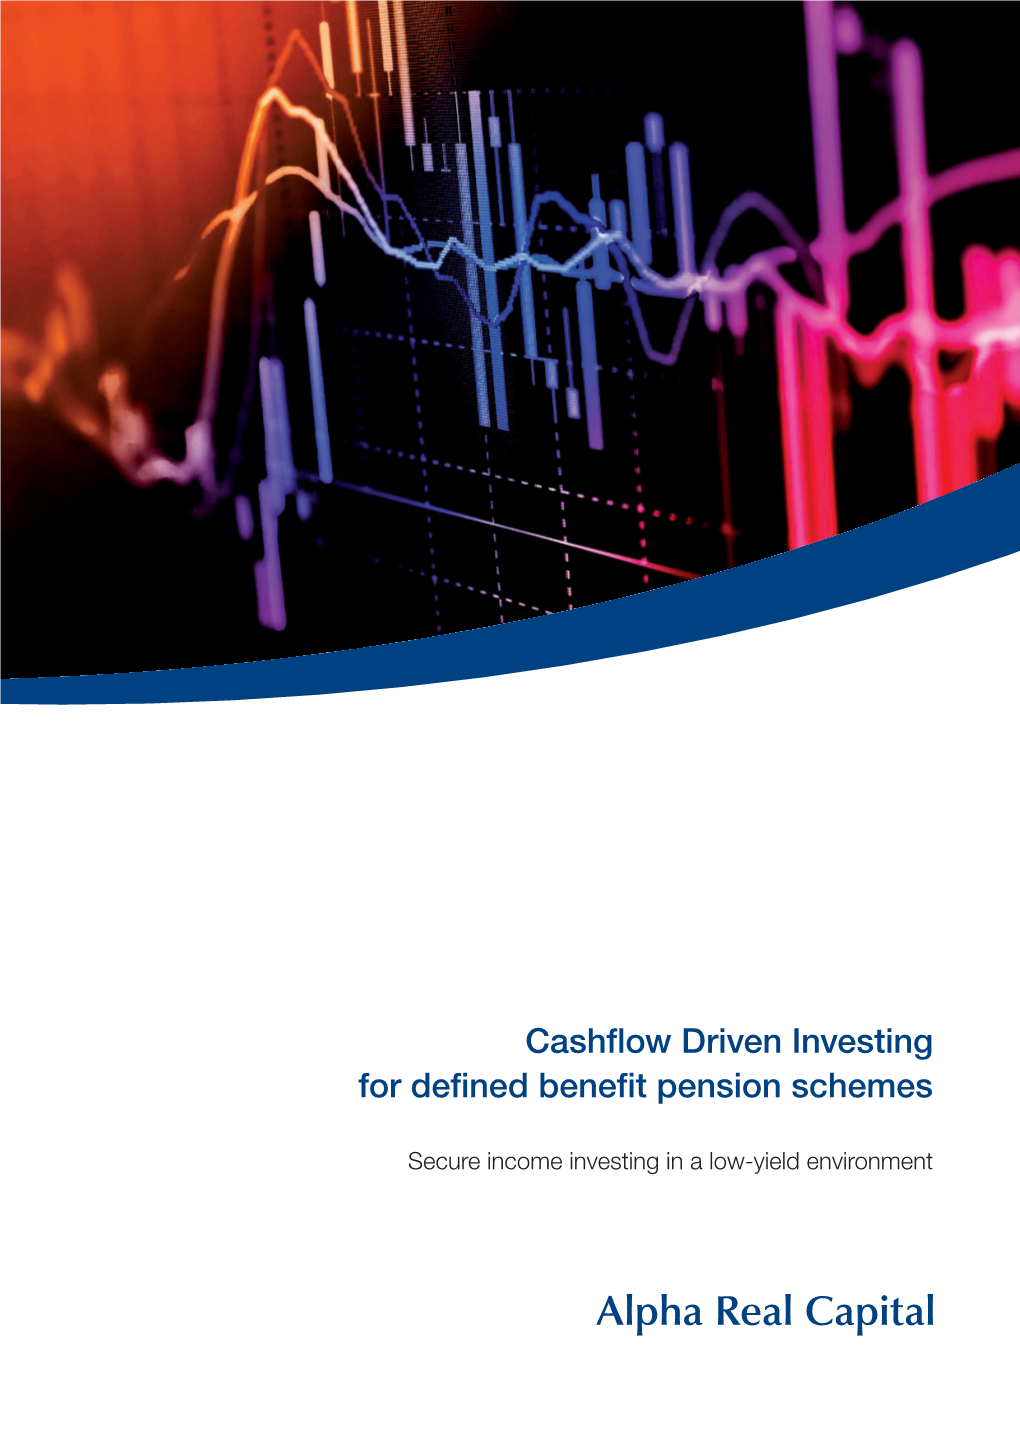 Cashflow Driven Investing for Defined Benefit Pension Schemes